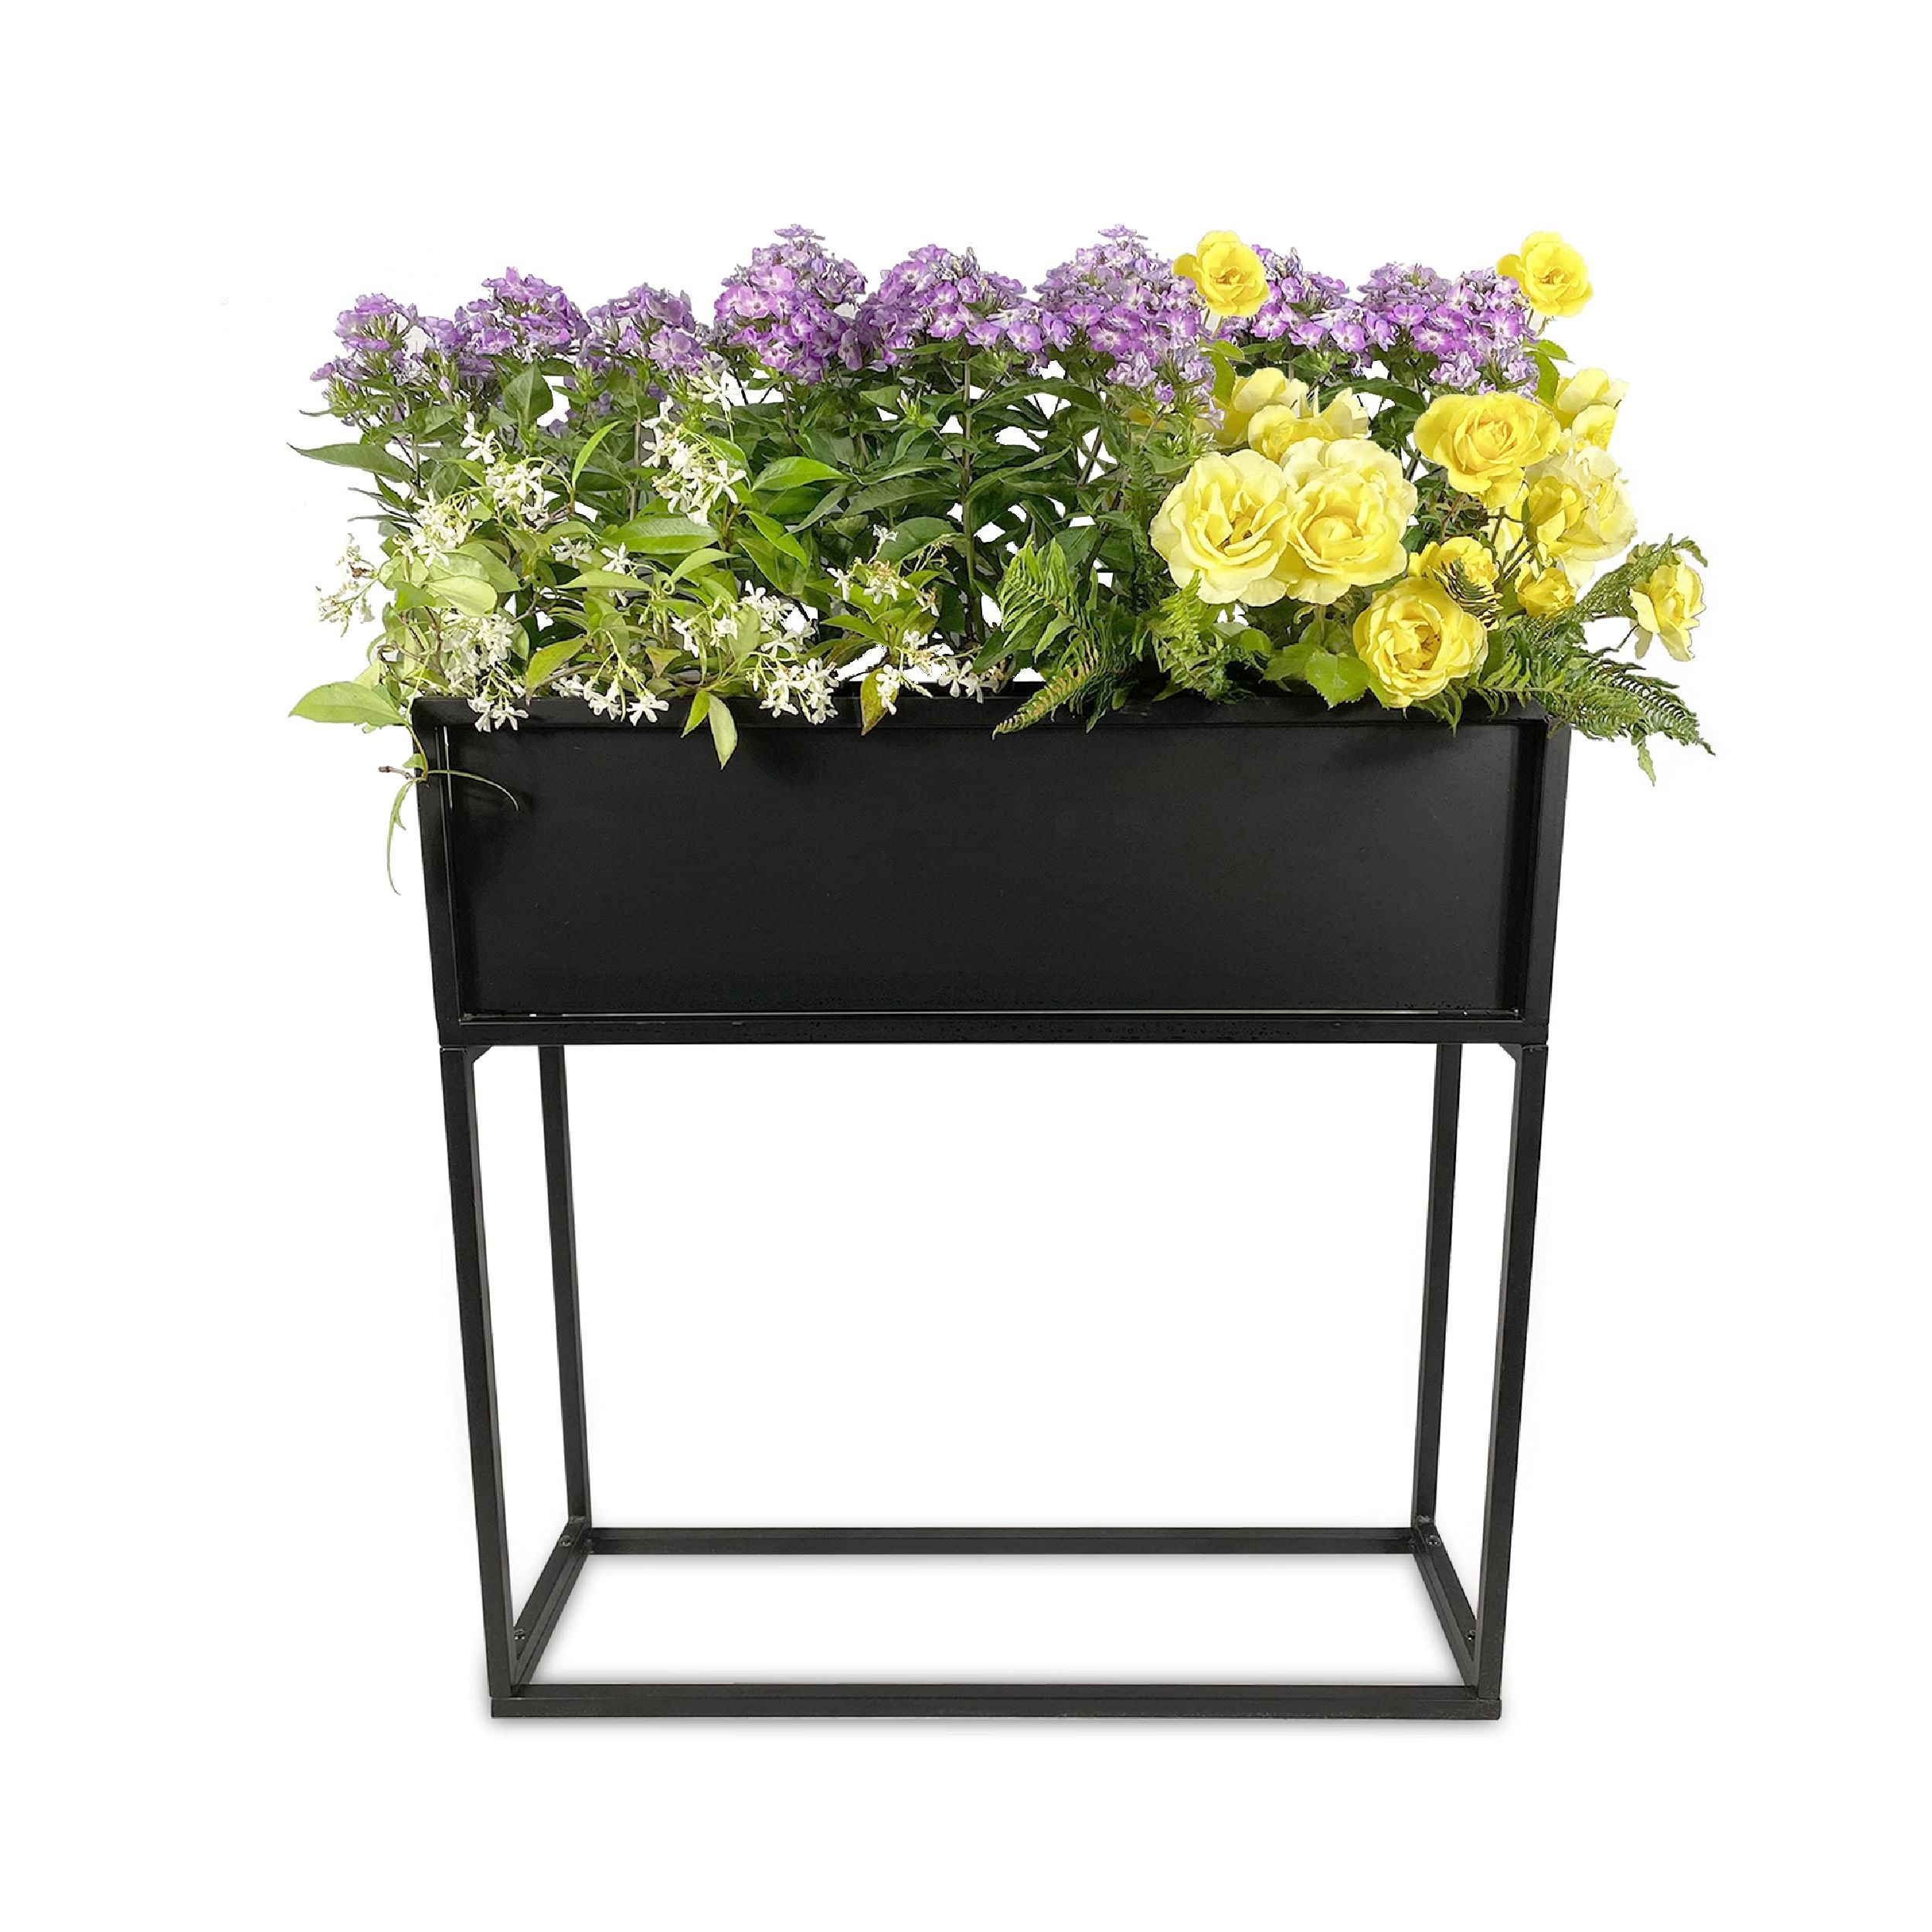 Widely Used Amazon : Cocoyard Modern Elevated Metal Rectangular Planter Box –  Planters For Outdoor Plants – Made Durable And Resilient Metal – Indoor  Outdoor Plant Stand – Ideal For Garden Decor, Backyard And With Rectangular Plant Stands (View 5 of 15)